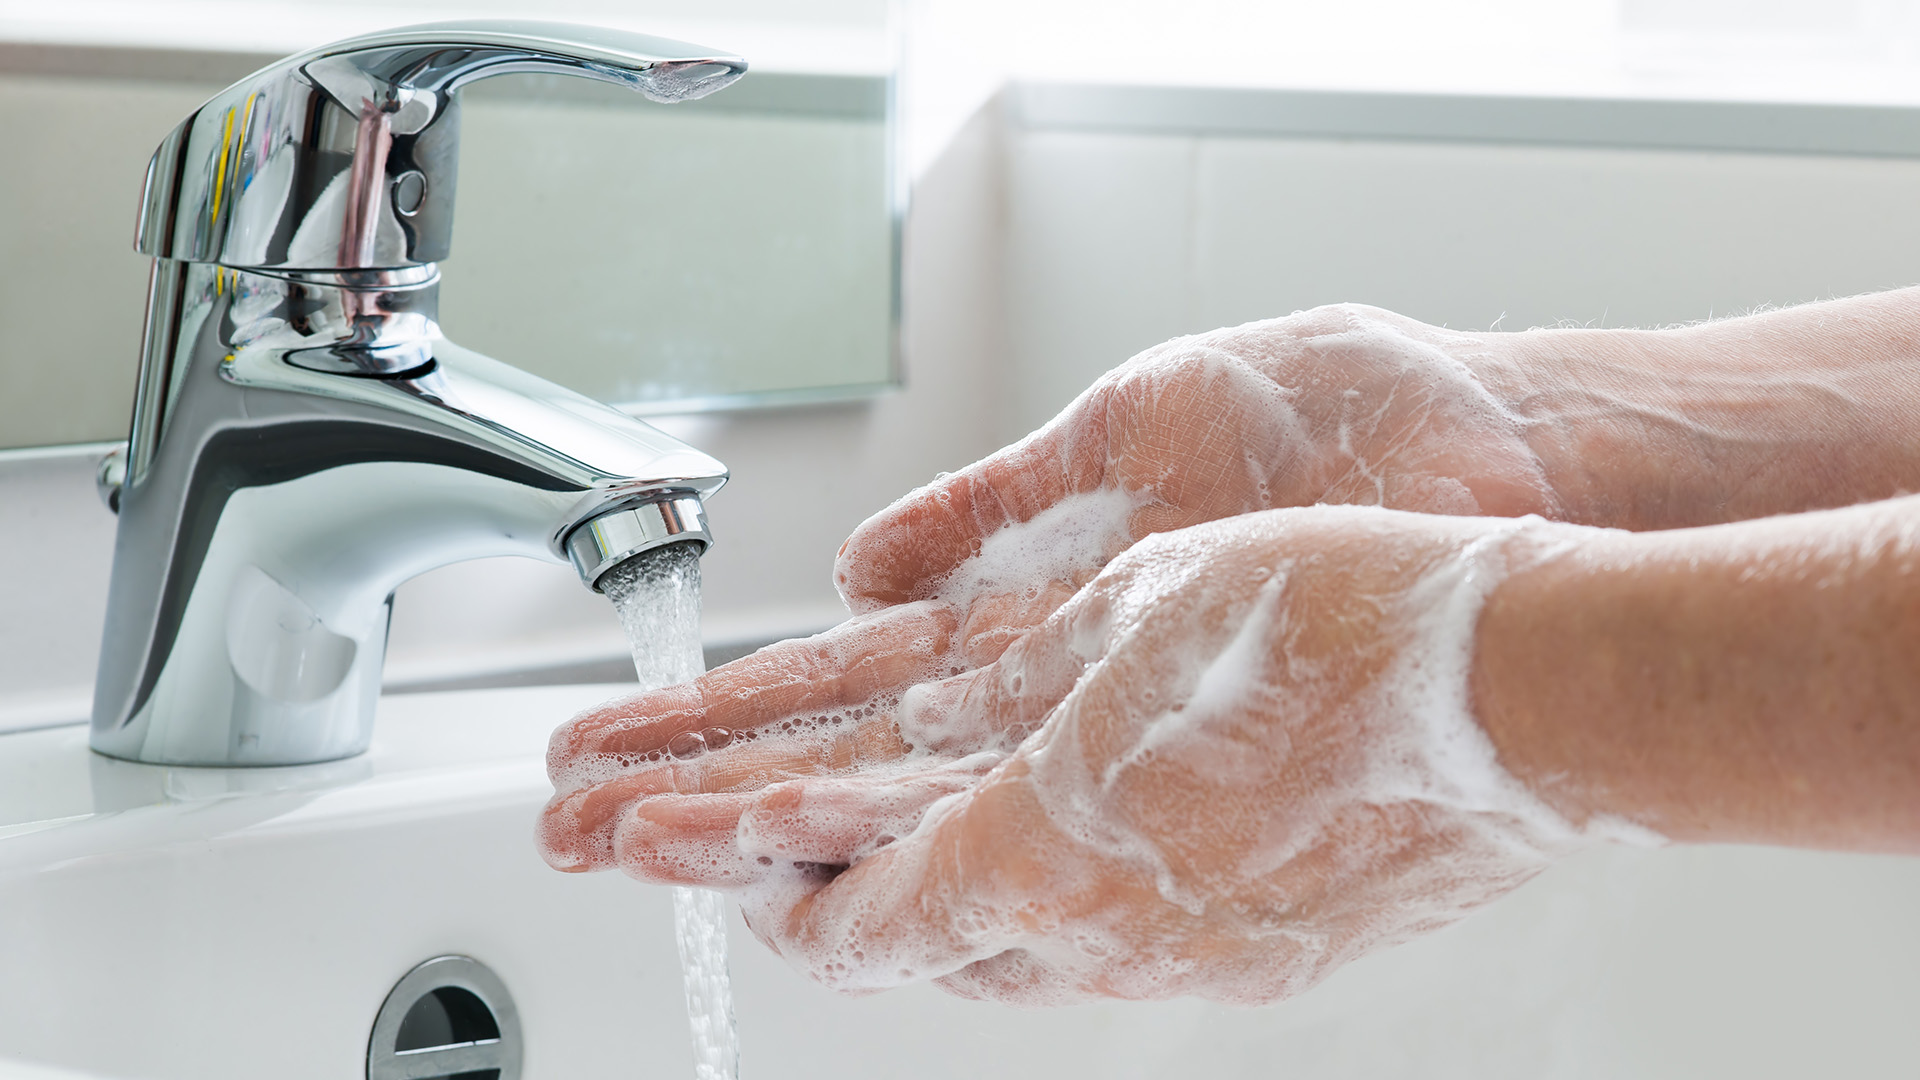 Frequent hand washing is essential (Getty Images)